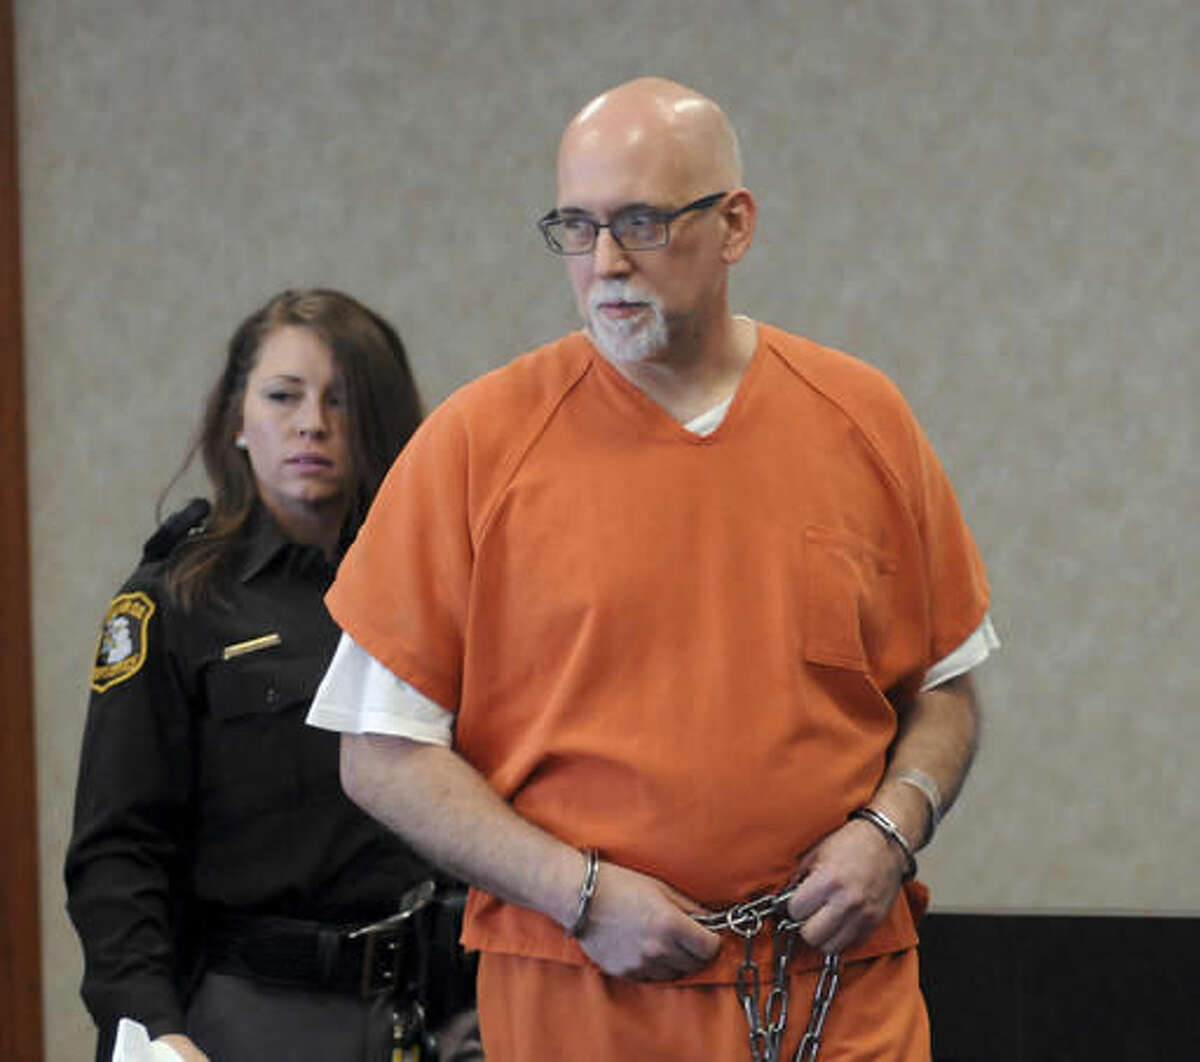 In this April 11, 2016 photo, former Dryden schools superintendent, Thomas Goulette, walks into court in Port Huron, Mich. According to court records, 51-year-old Goulette was sentenced to three-and-a-half to 20 years in prison on a charge of armed robbery Monday, May 16, 2016. He pleaded guilty last month to the January robbery of a Brockway Township bank. (Andrew Jowett/Port Huron Times Herald via AP)